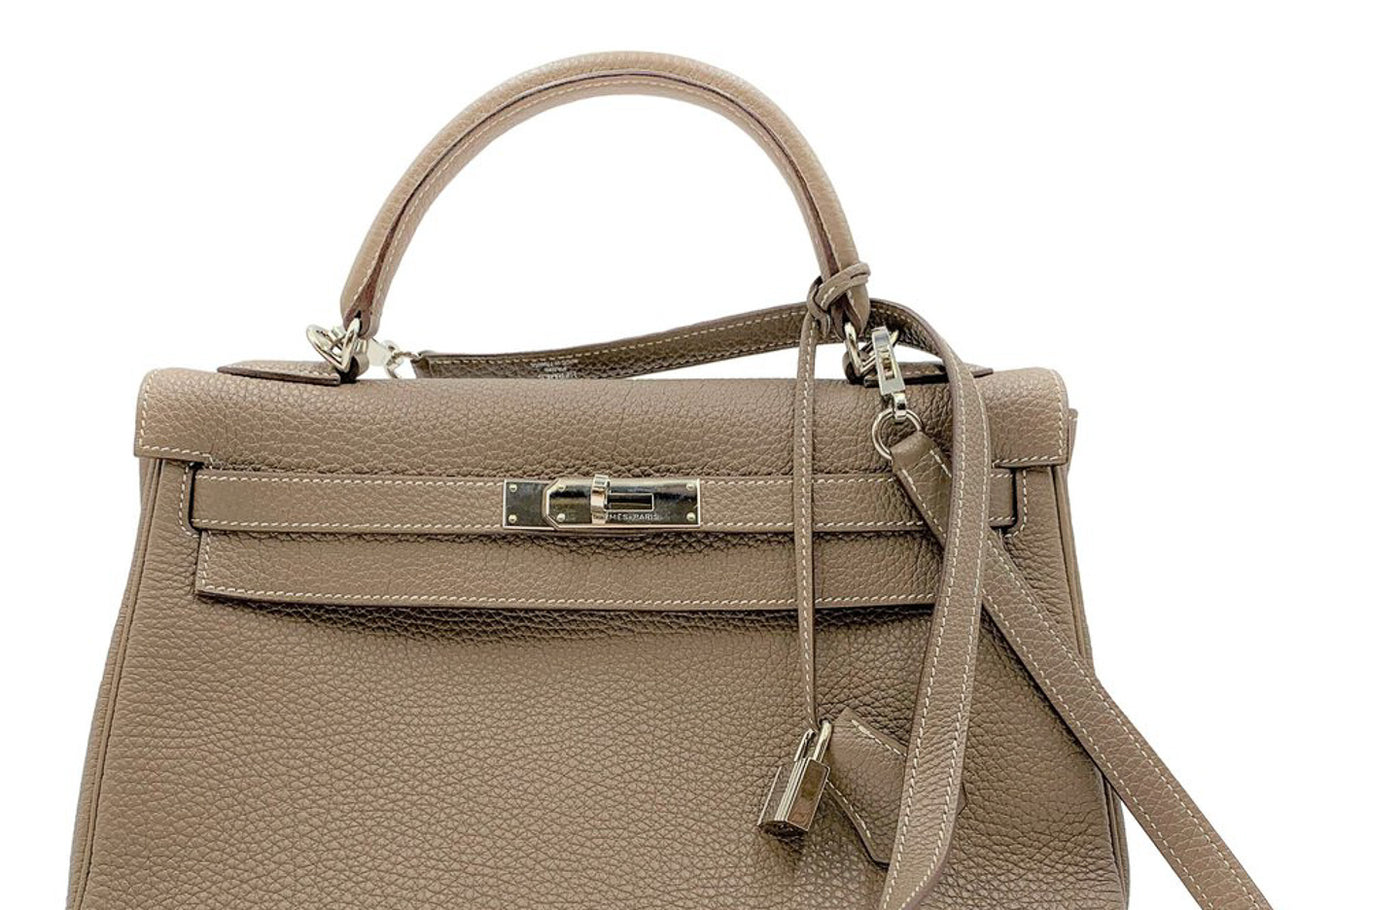 Why Are Hermes Bags So Expensive?